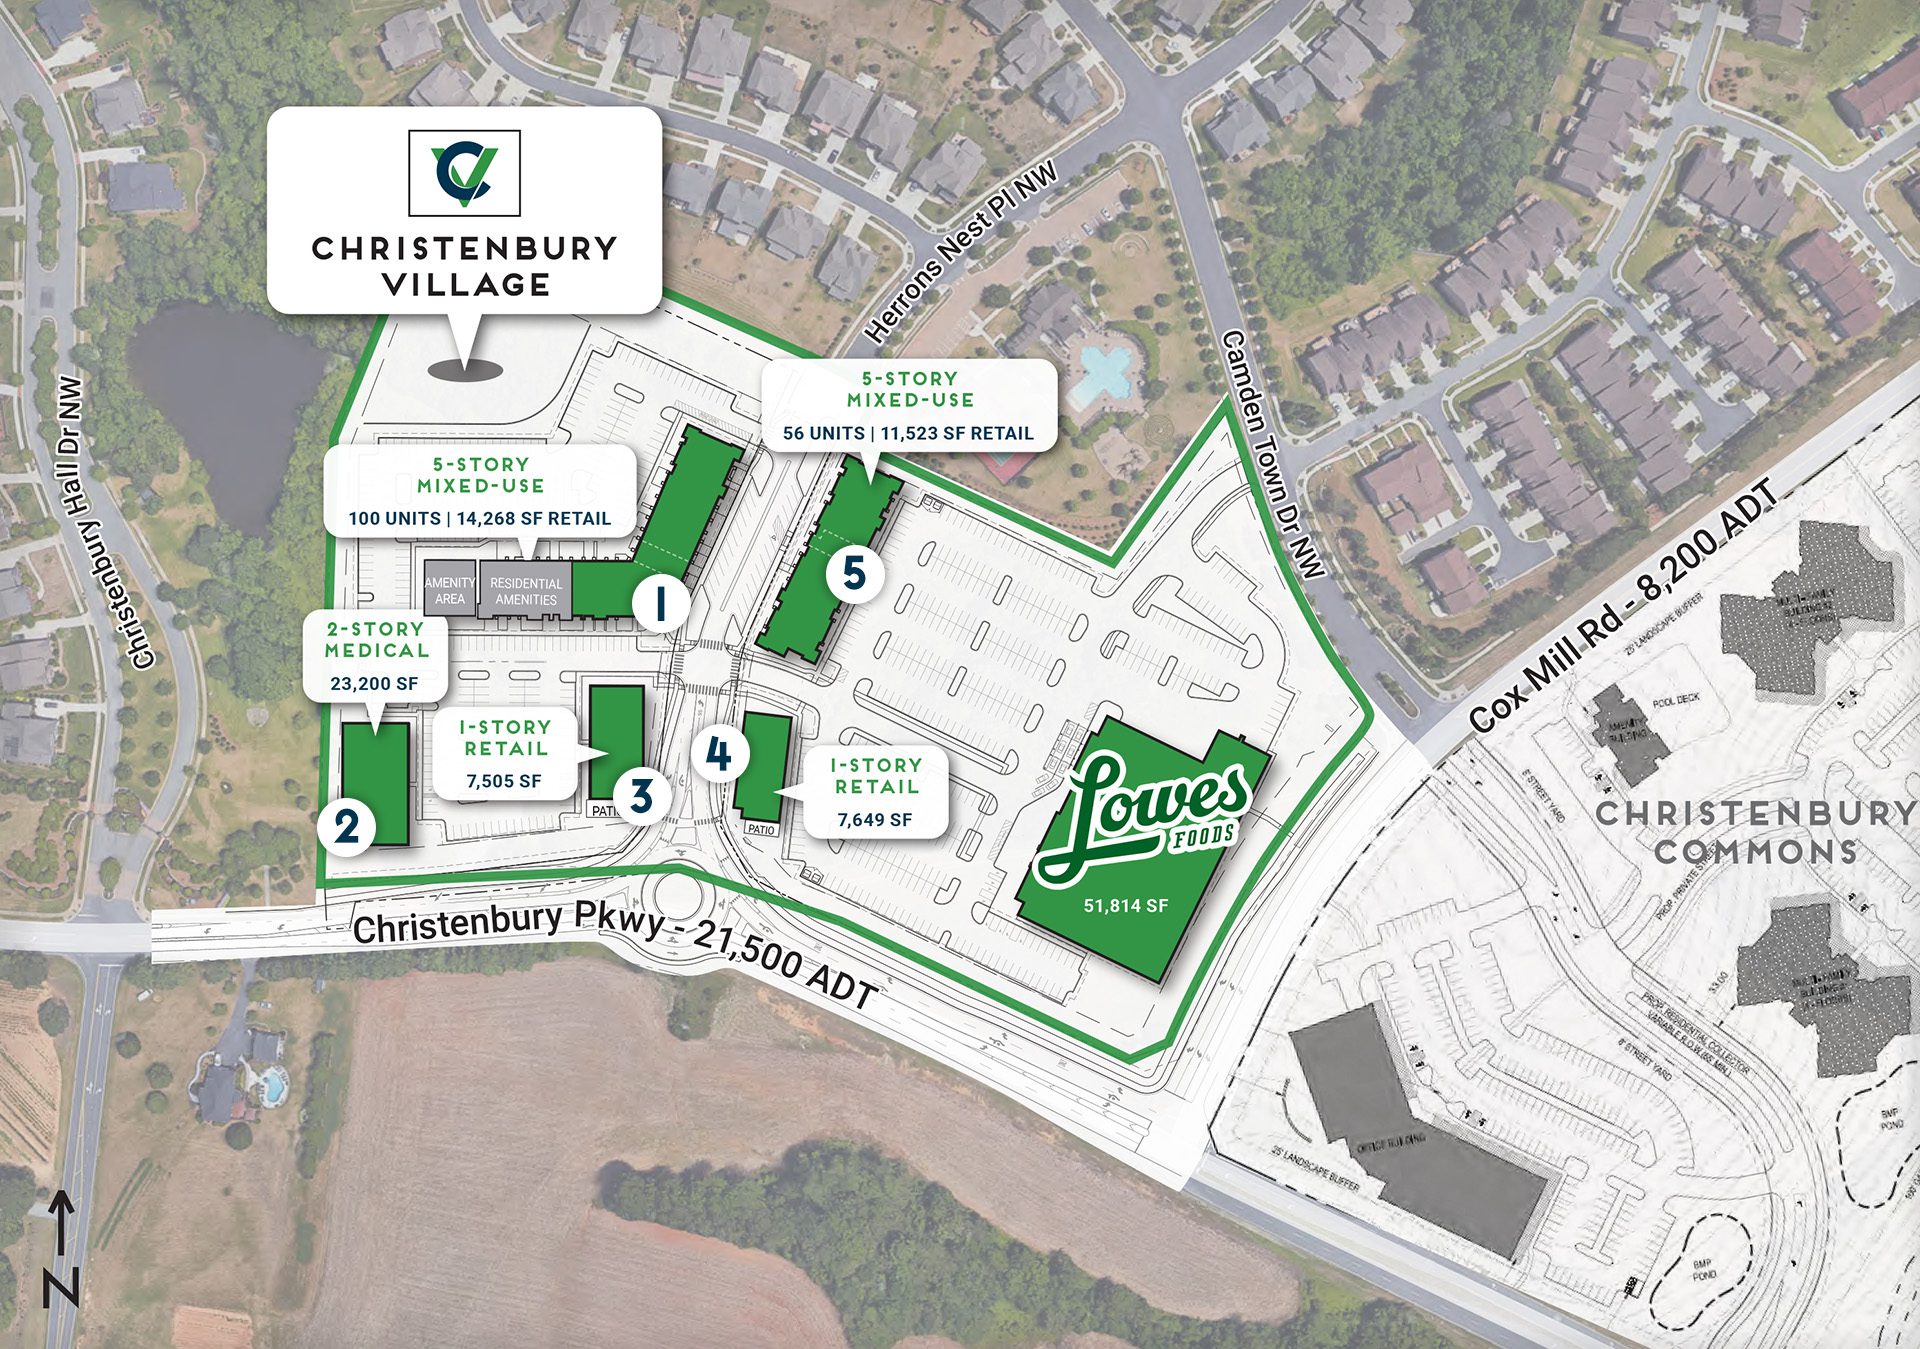 Christenbury Village master plan overlay on aerial with 5 green building shapes